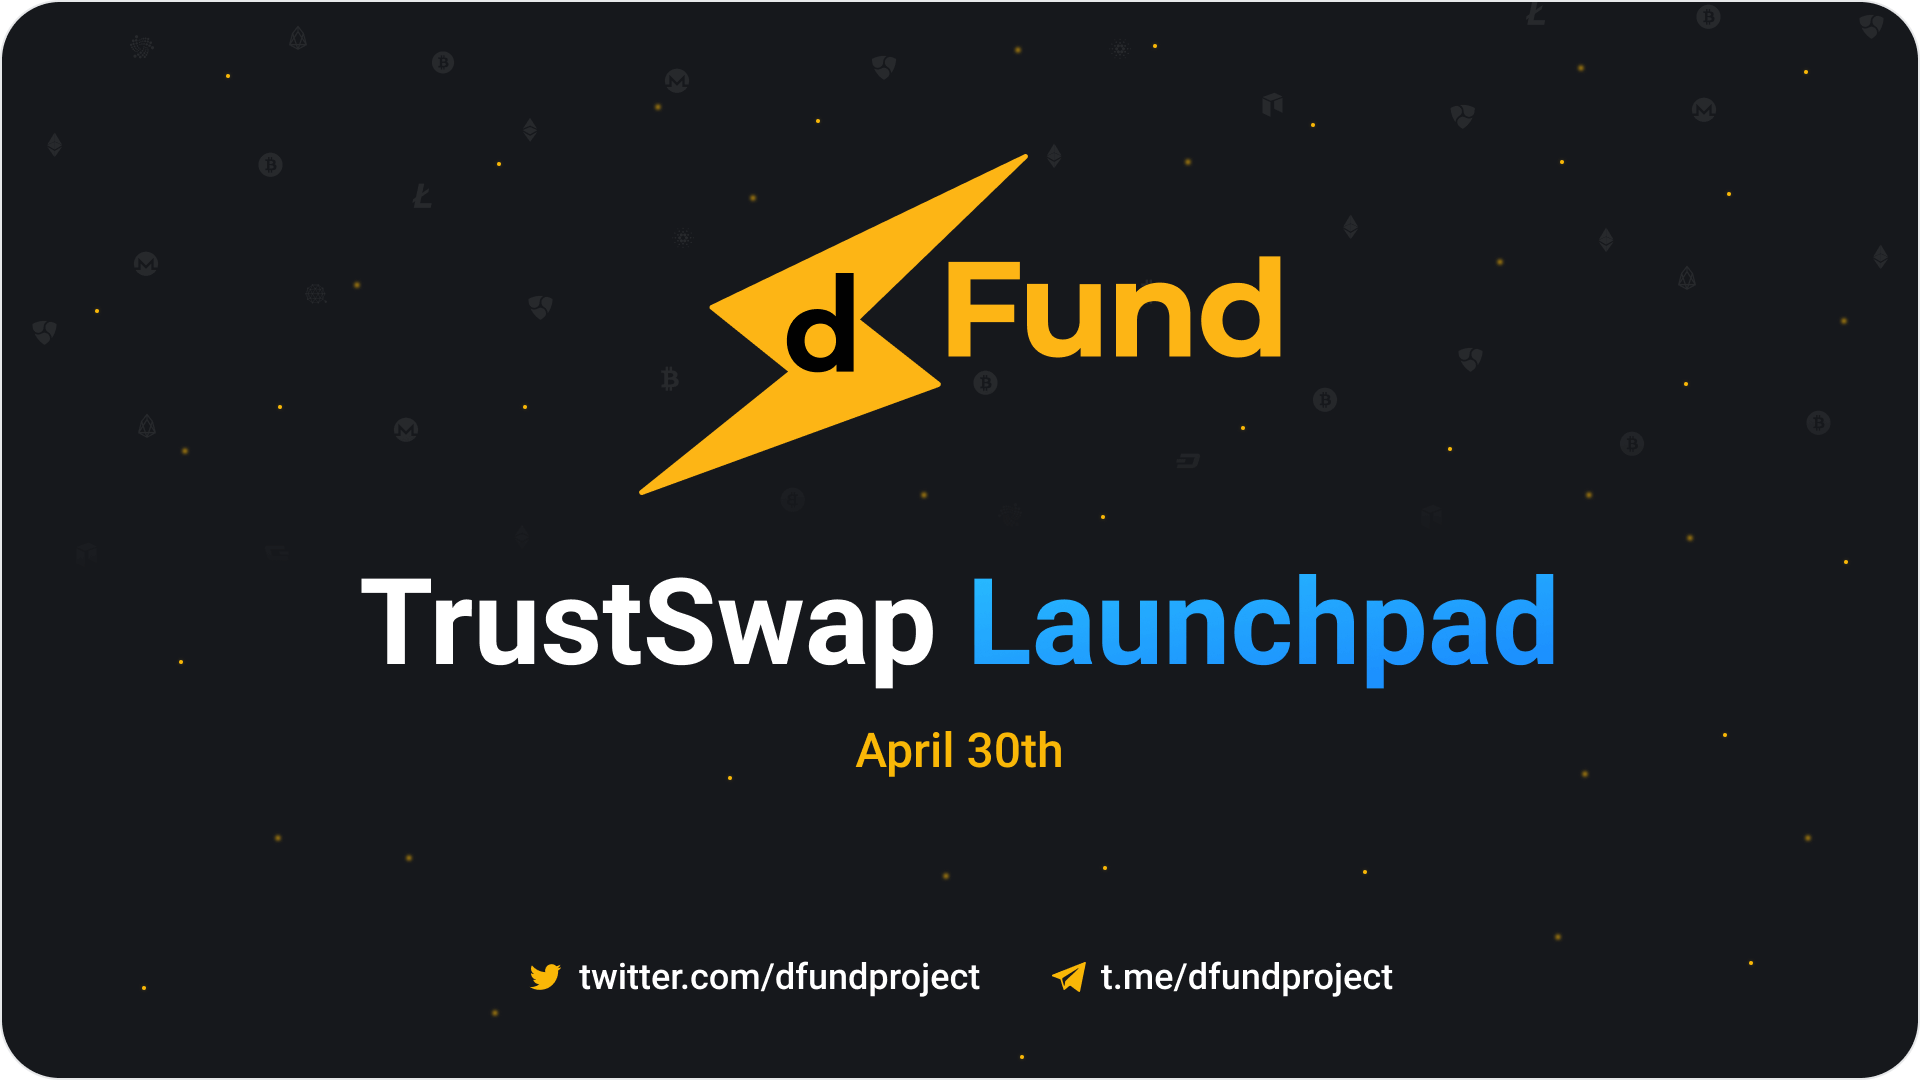 dFund Is LIVE On TrustSwap Launchpad